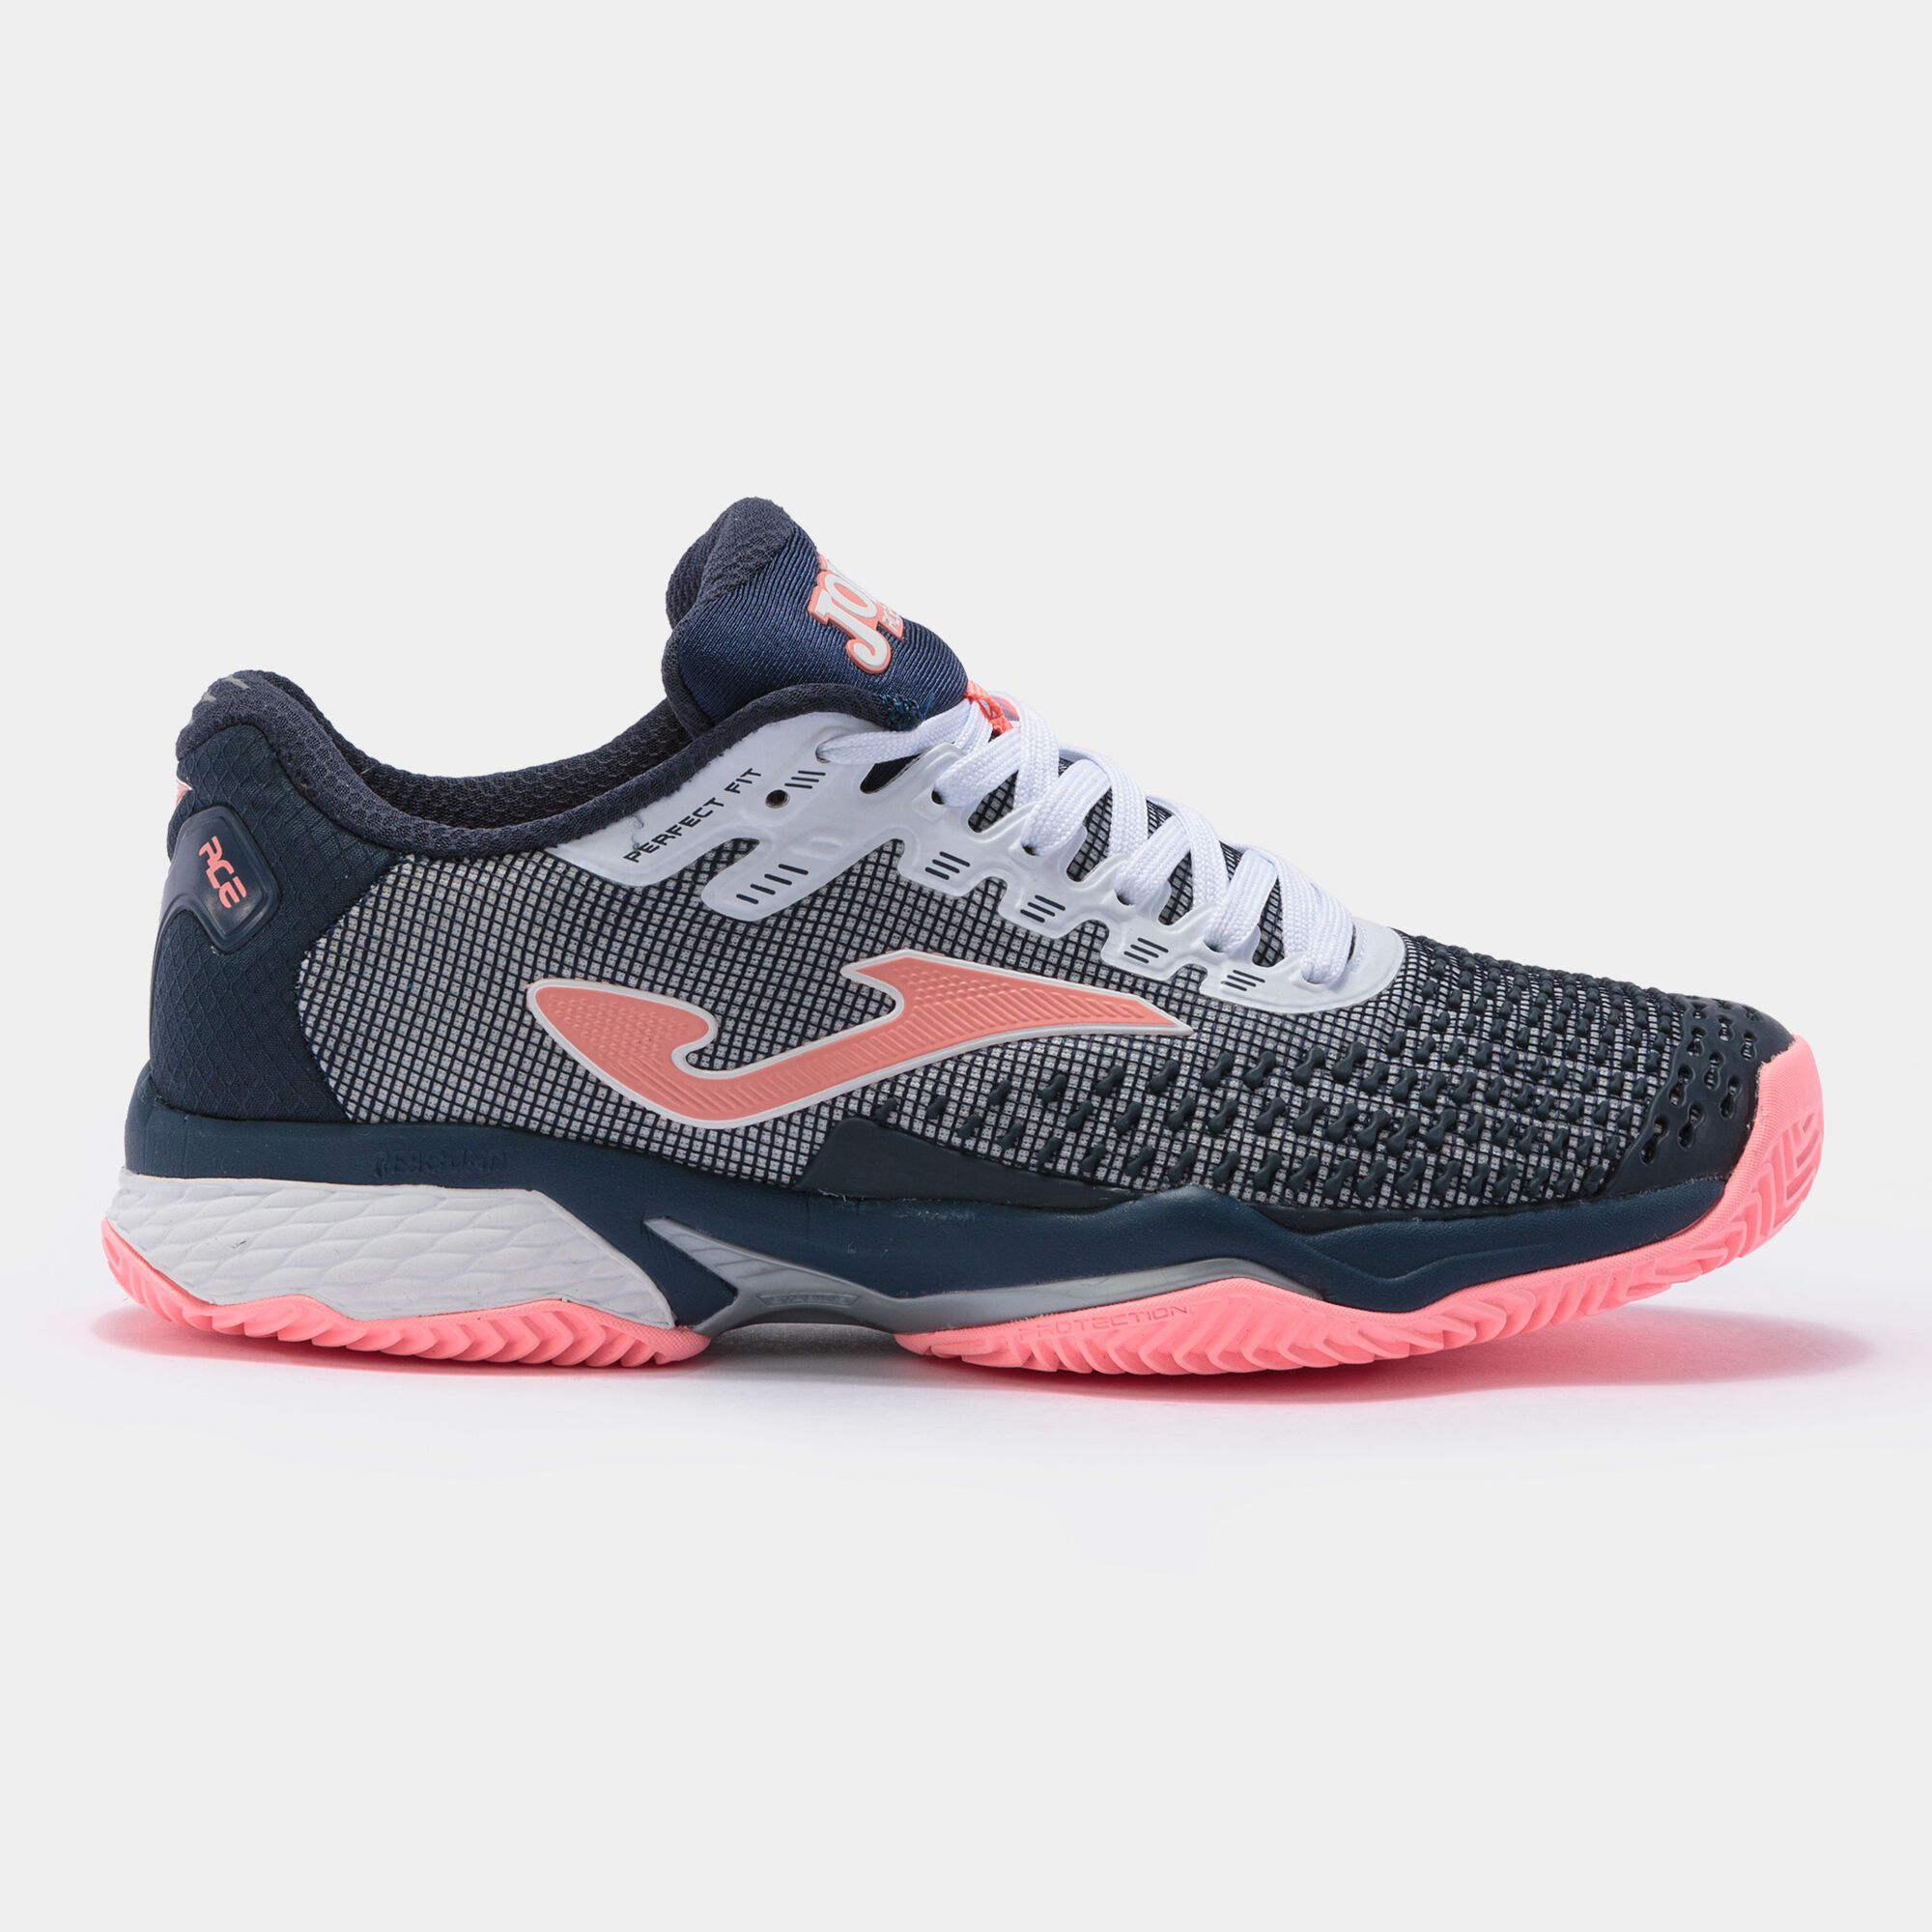 SHOES ACE PRO 21 CLAY WOMAN NAVY BLUE PINK